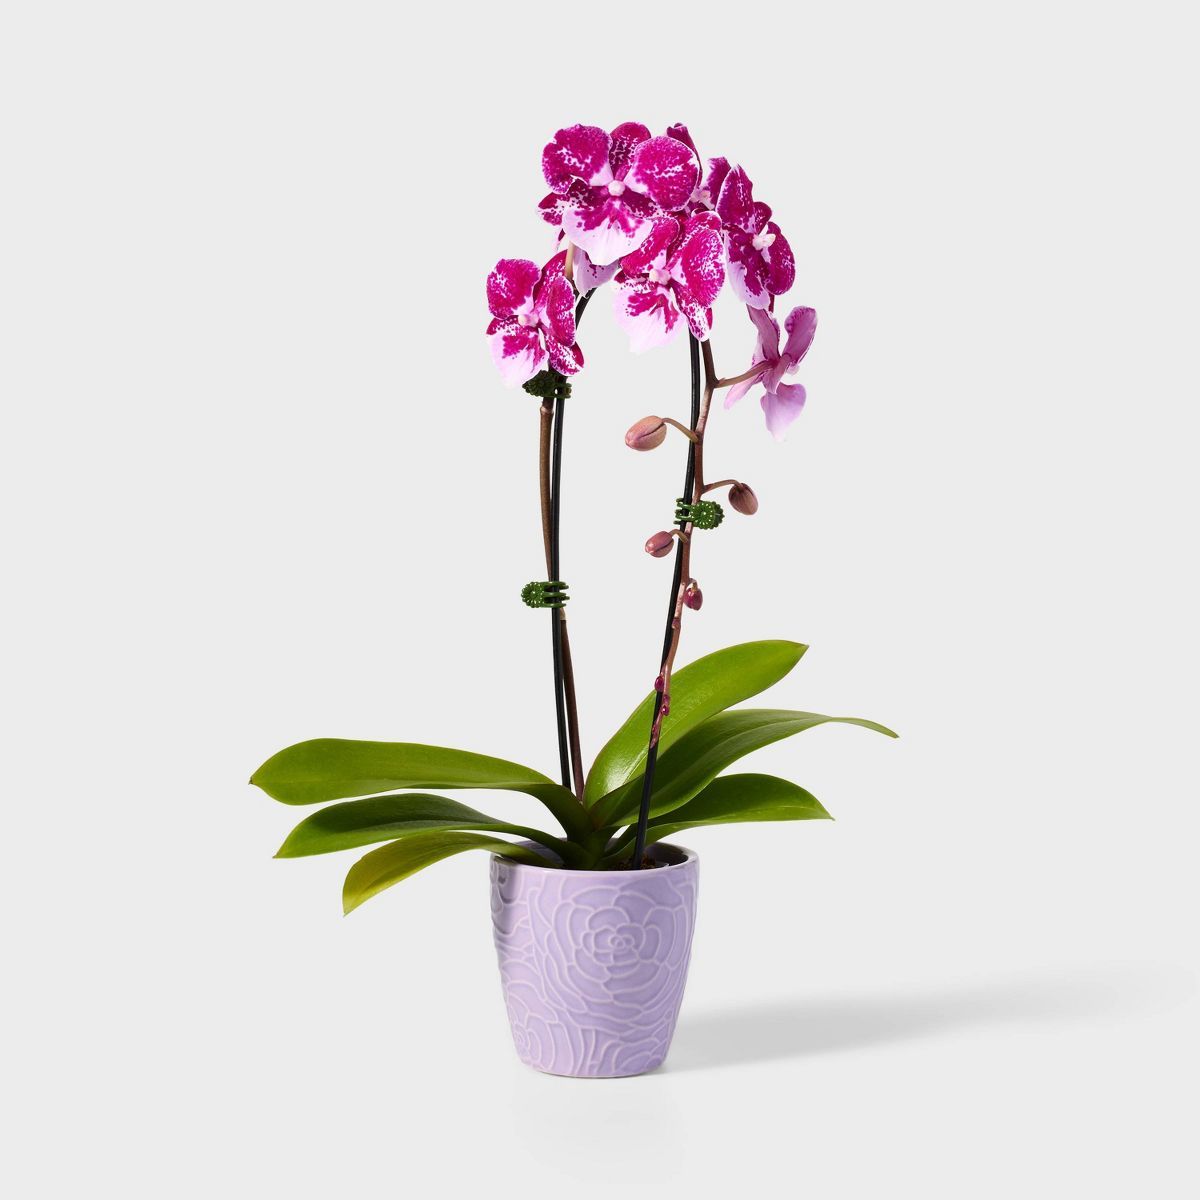 Live 3" Pink Purple Waterfall Orchid Houseplant - Spritz™ | Target